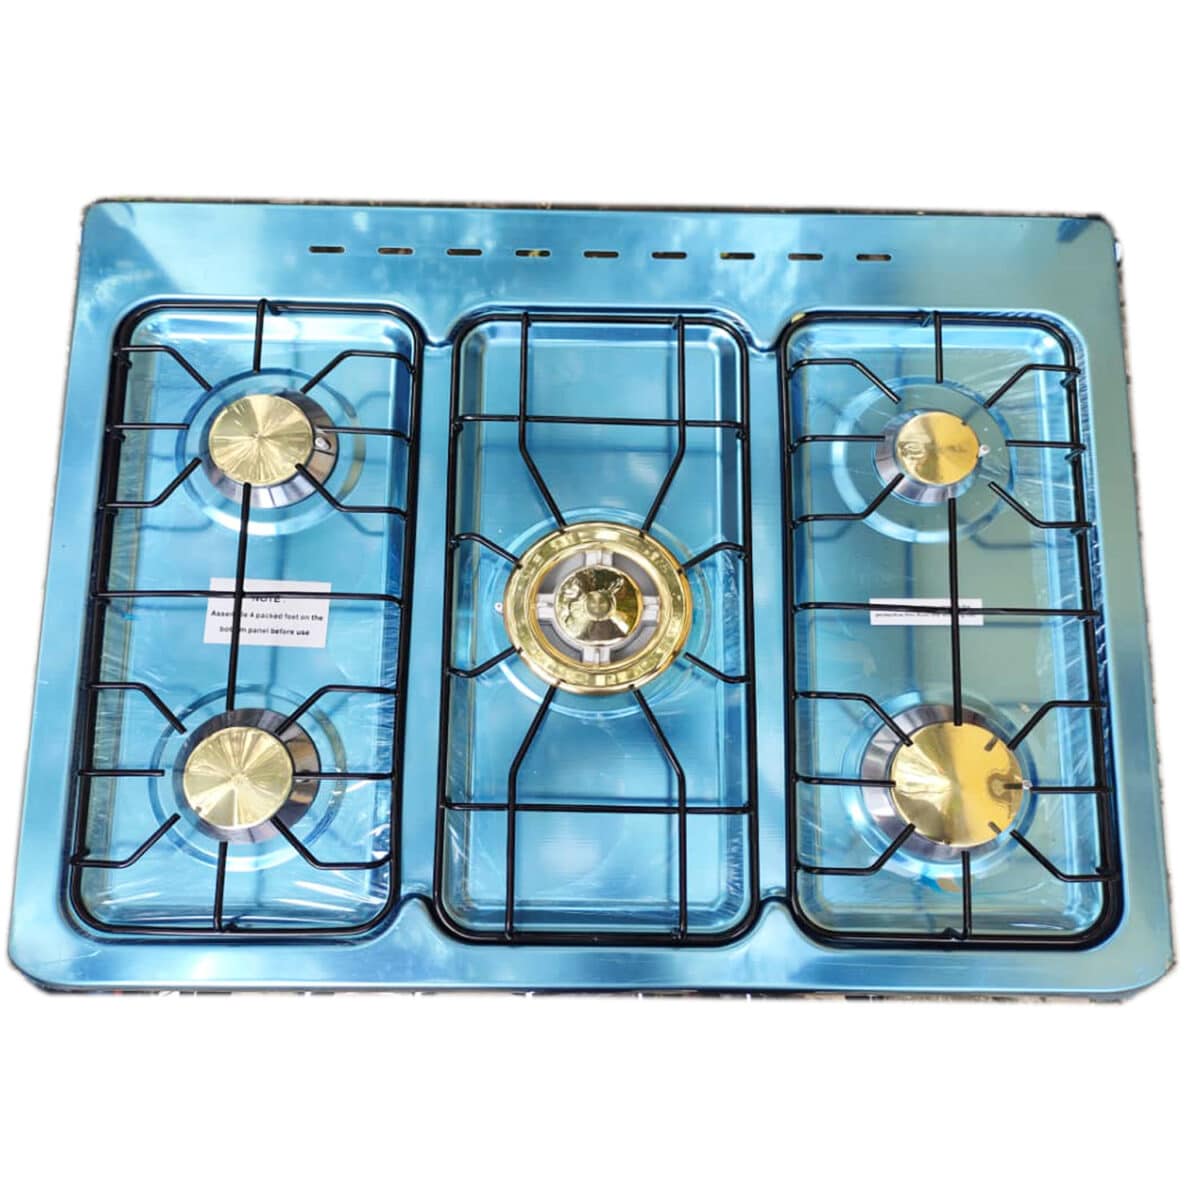 NOVO 5 Gas Burner with Oven and Grill Top